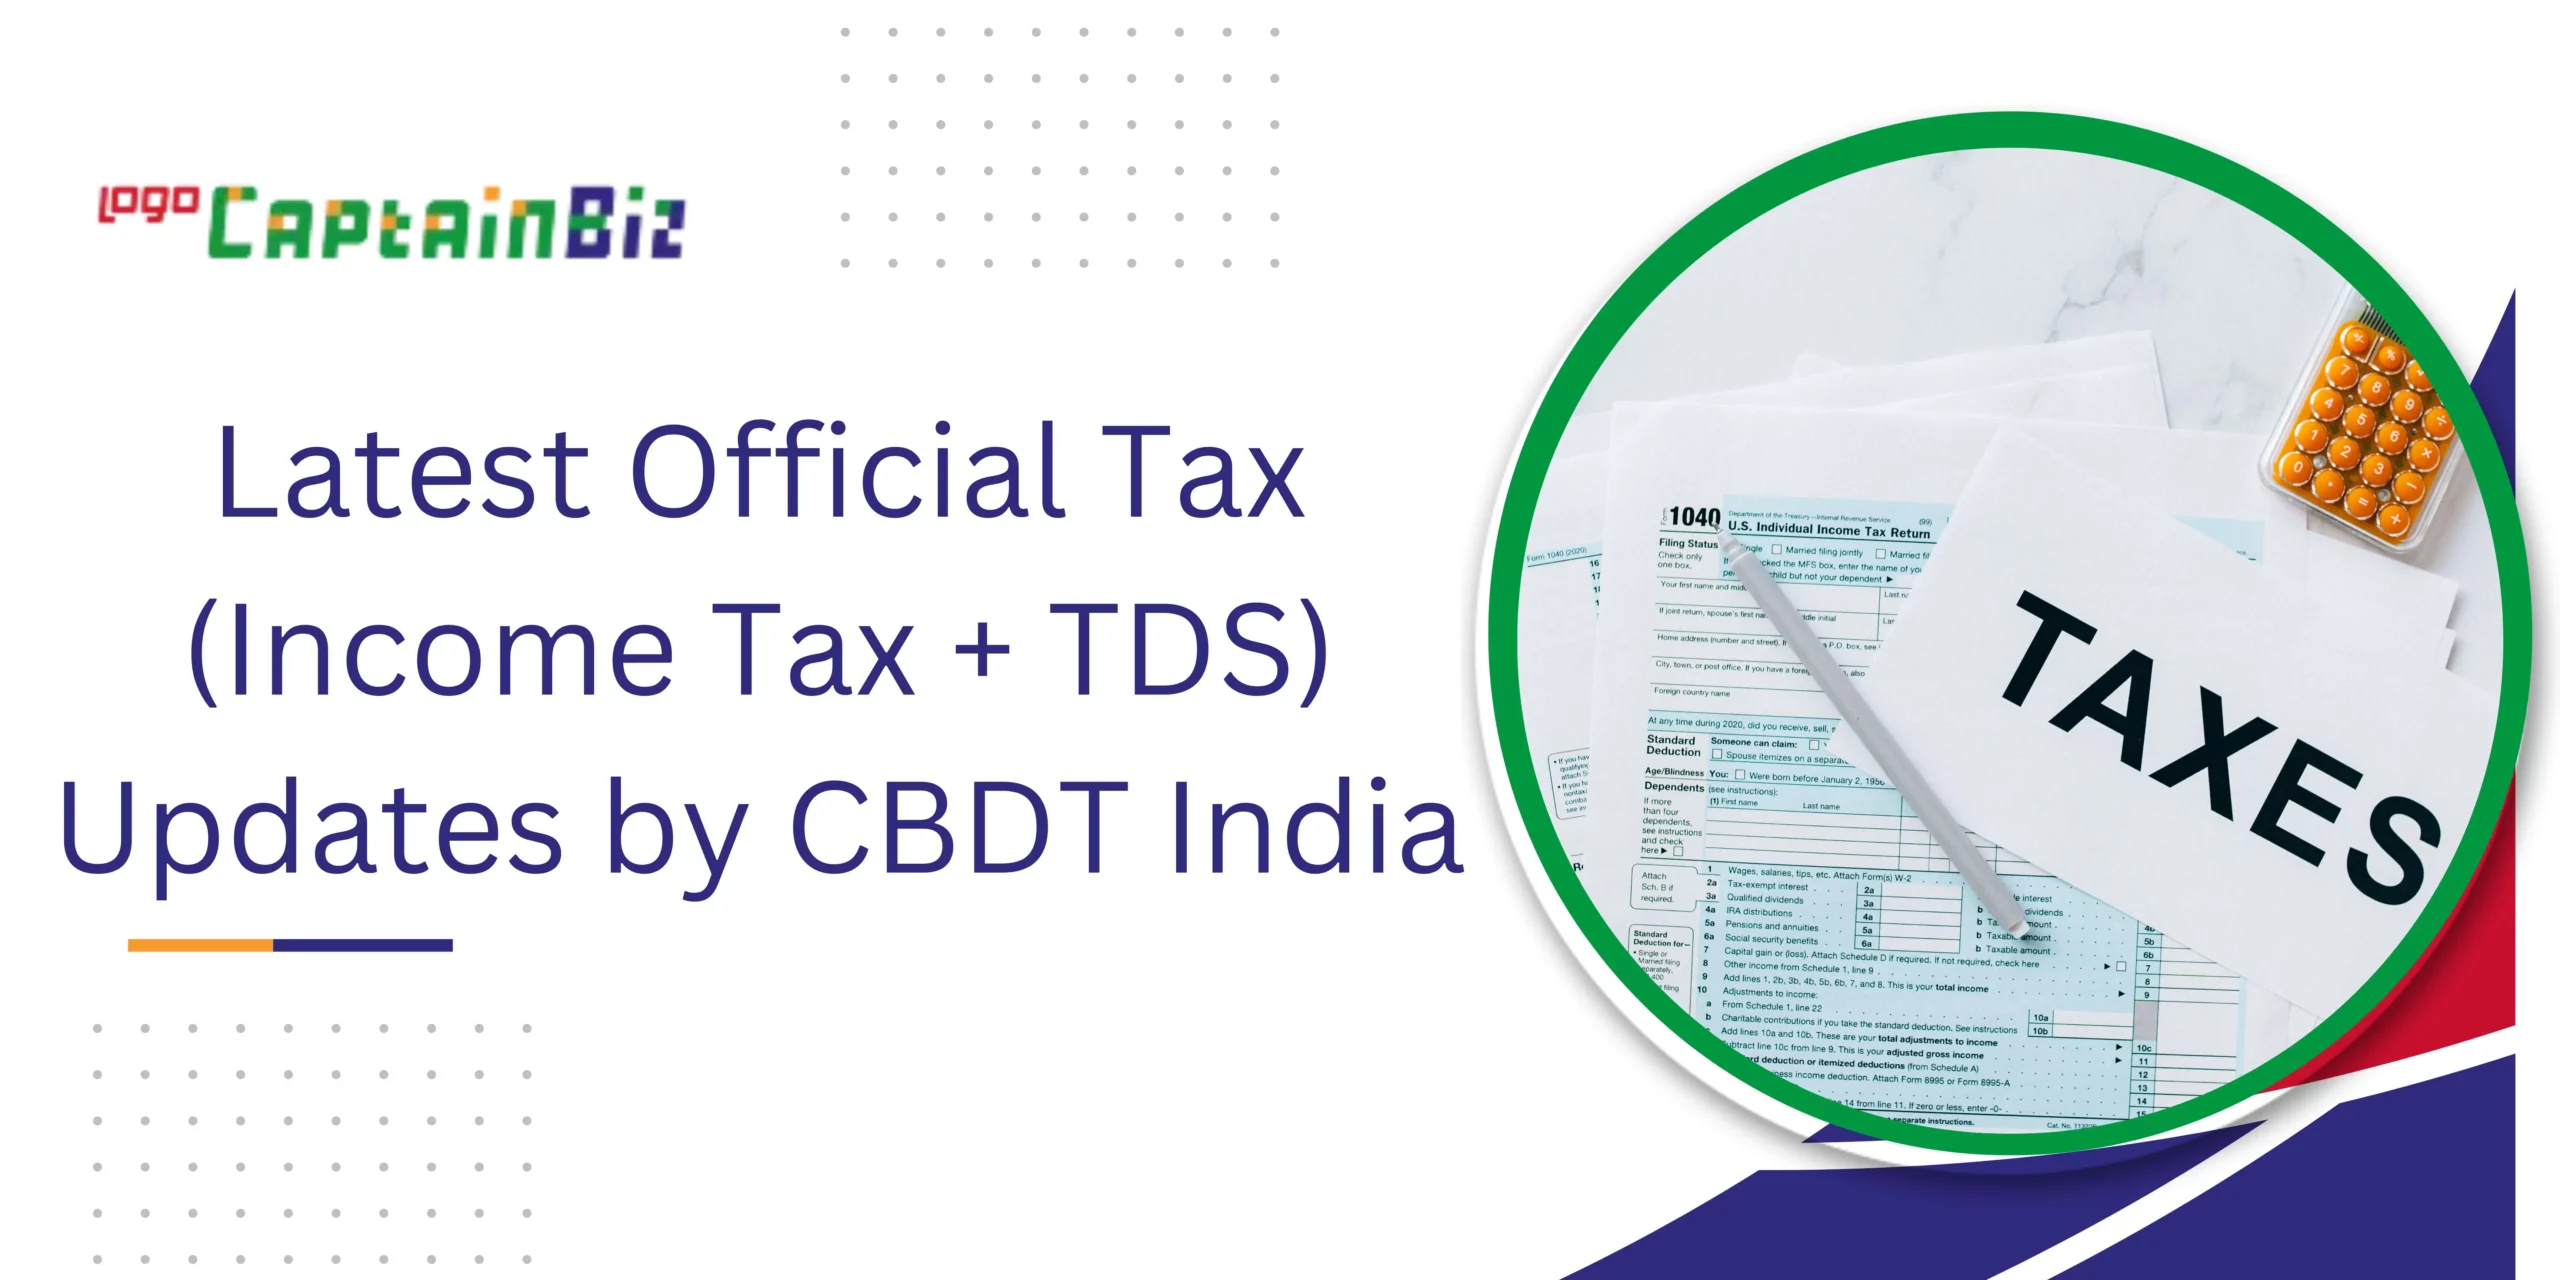 captainbiz latest official tax income tax tds updates by cbdt india